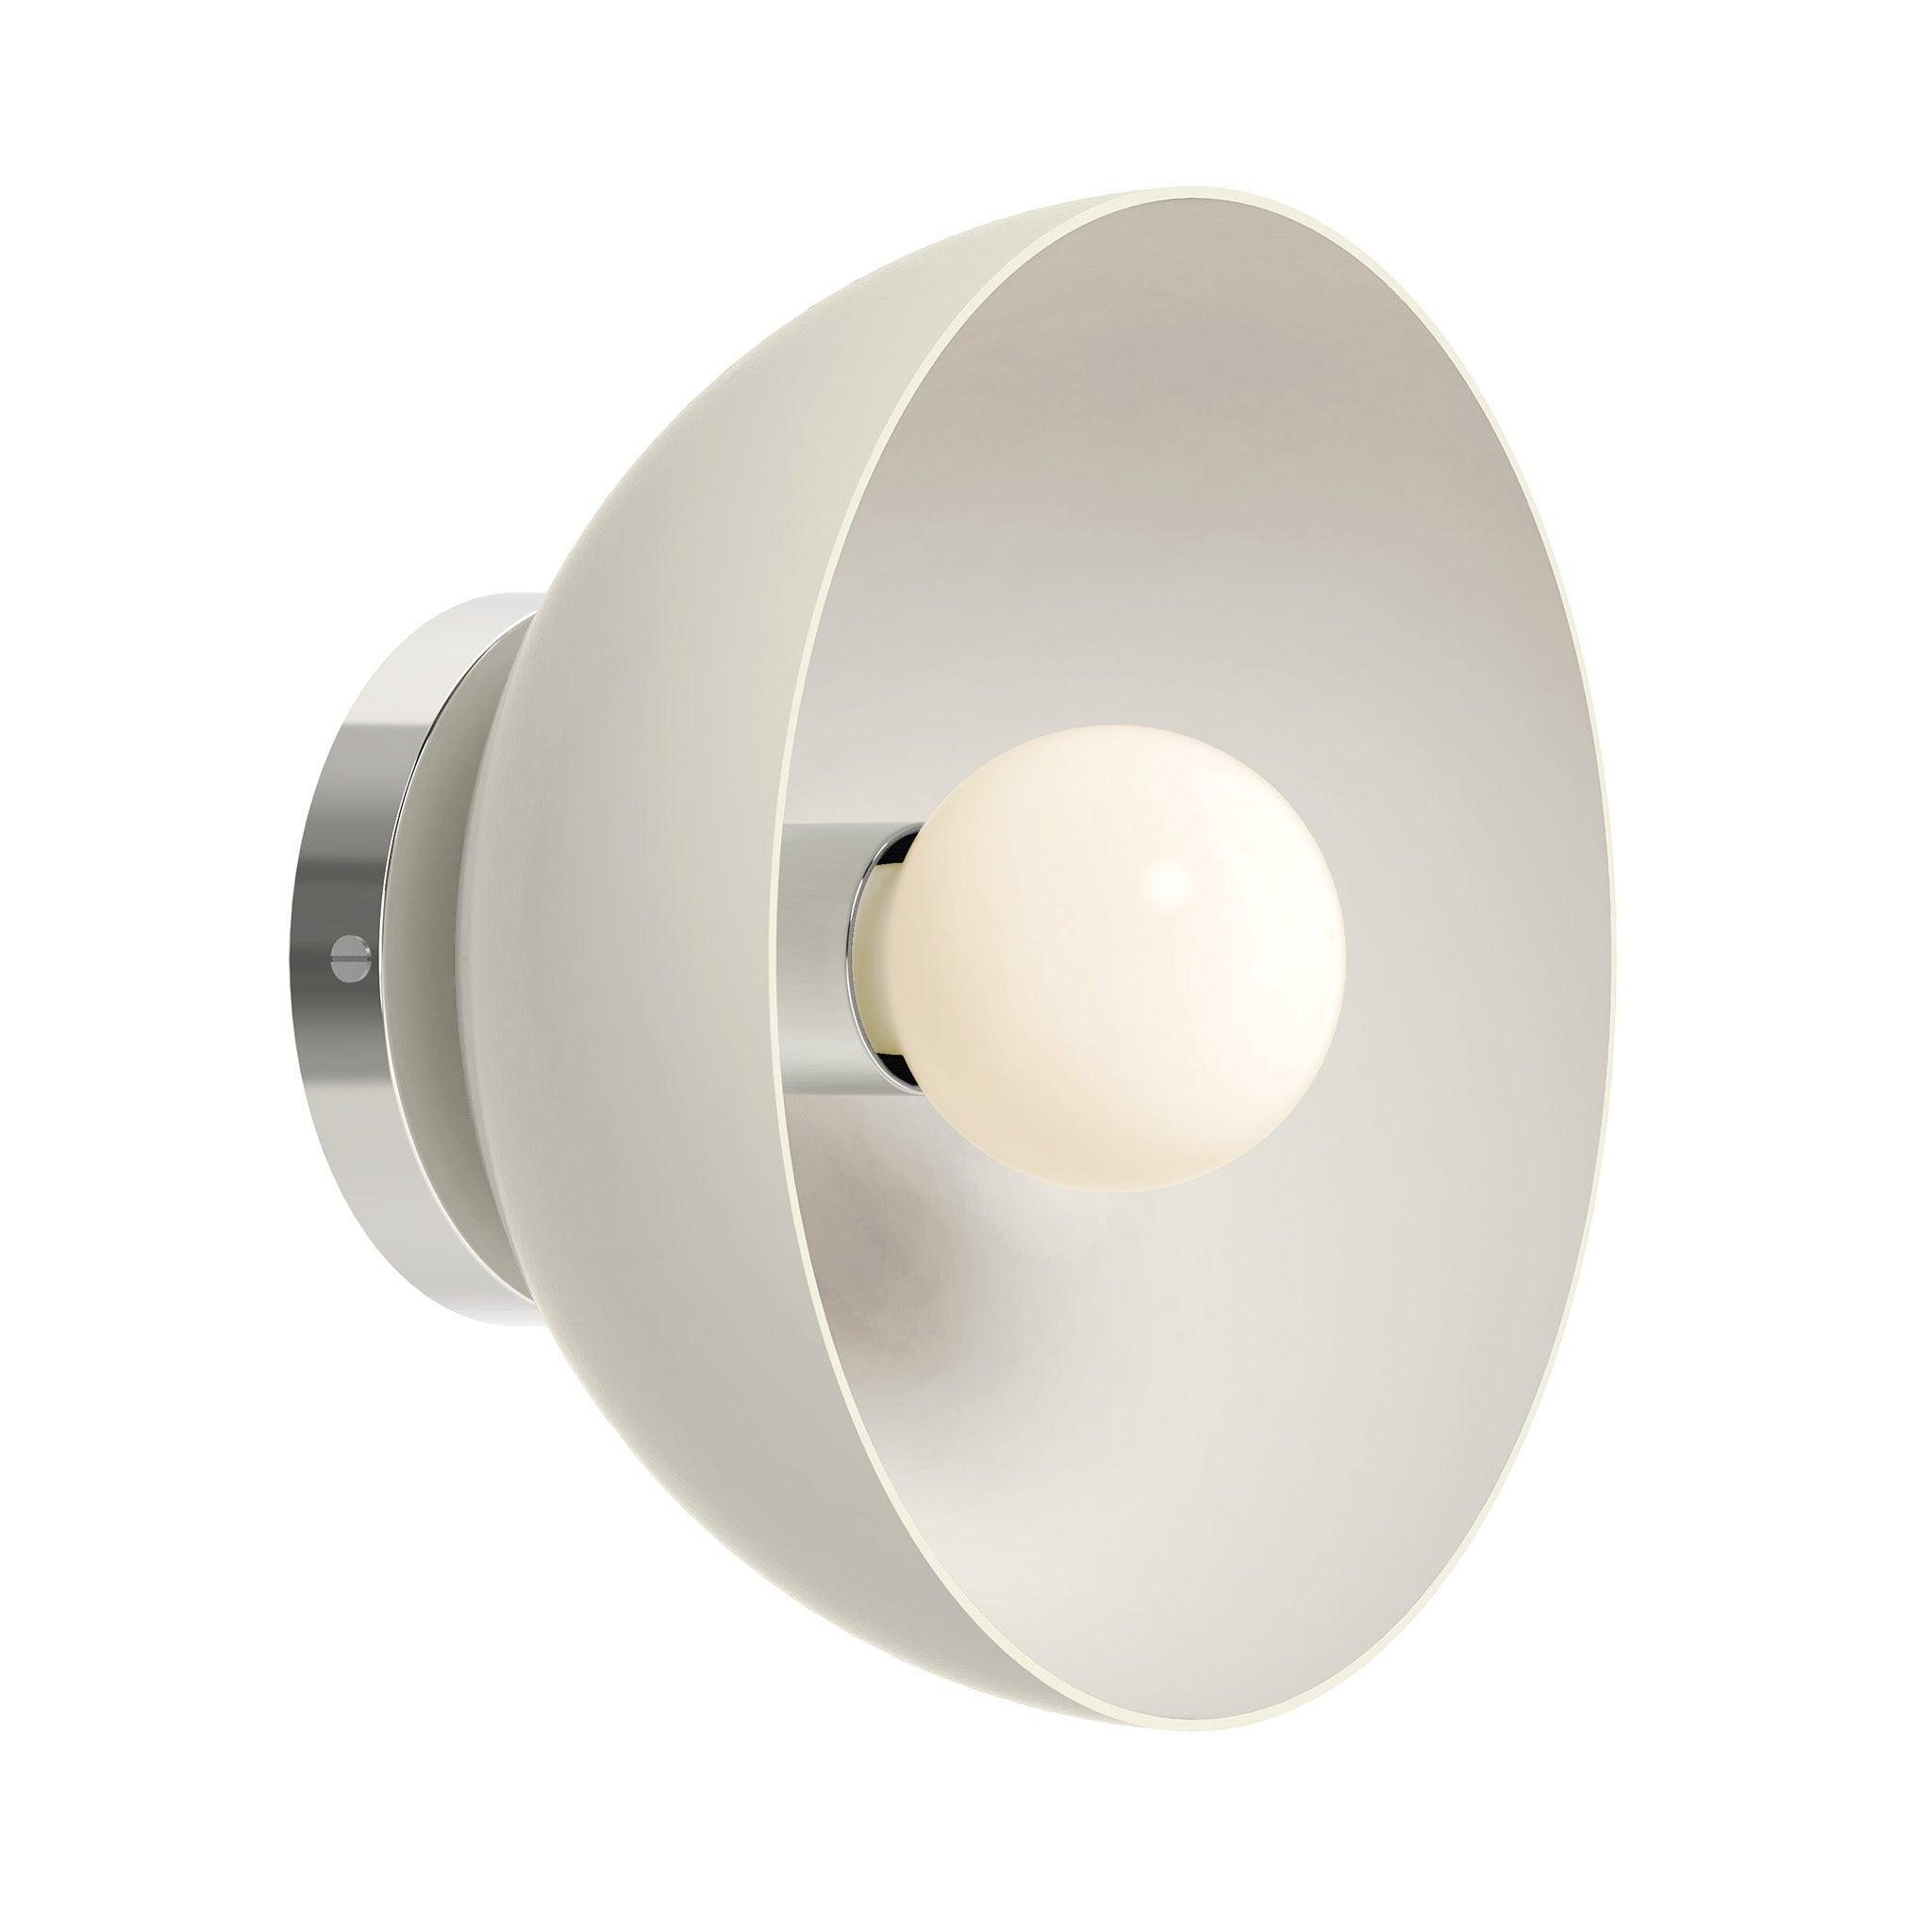 Nickel and chalk color hemi dome sconce 10" Dutton Brown lighting